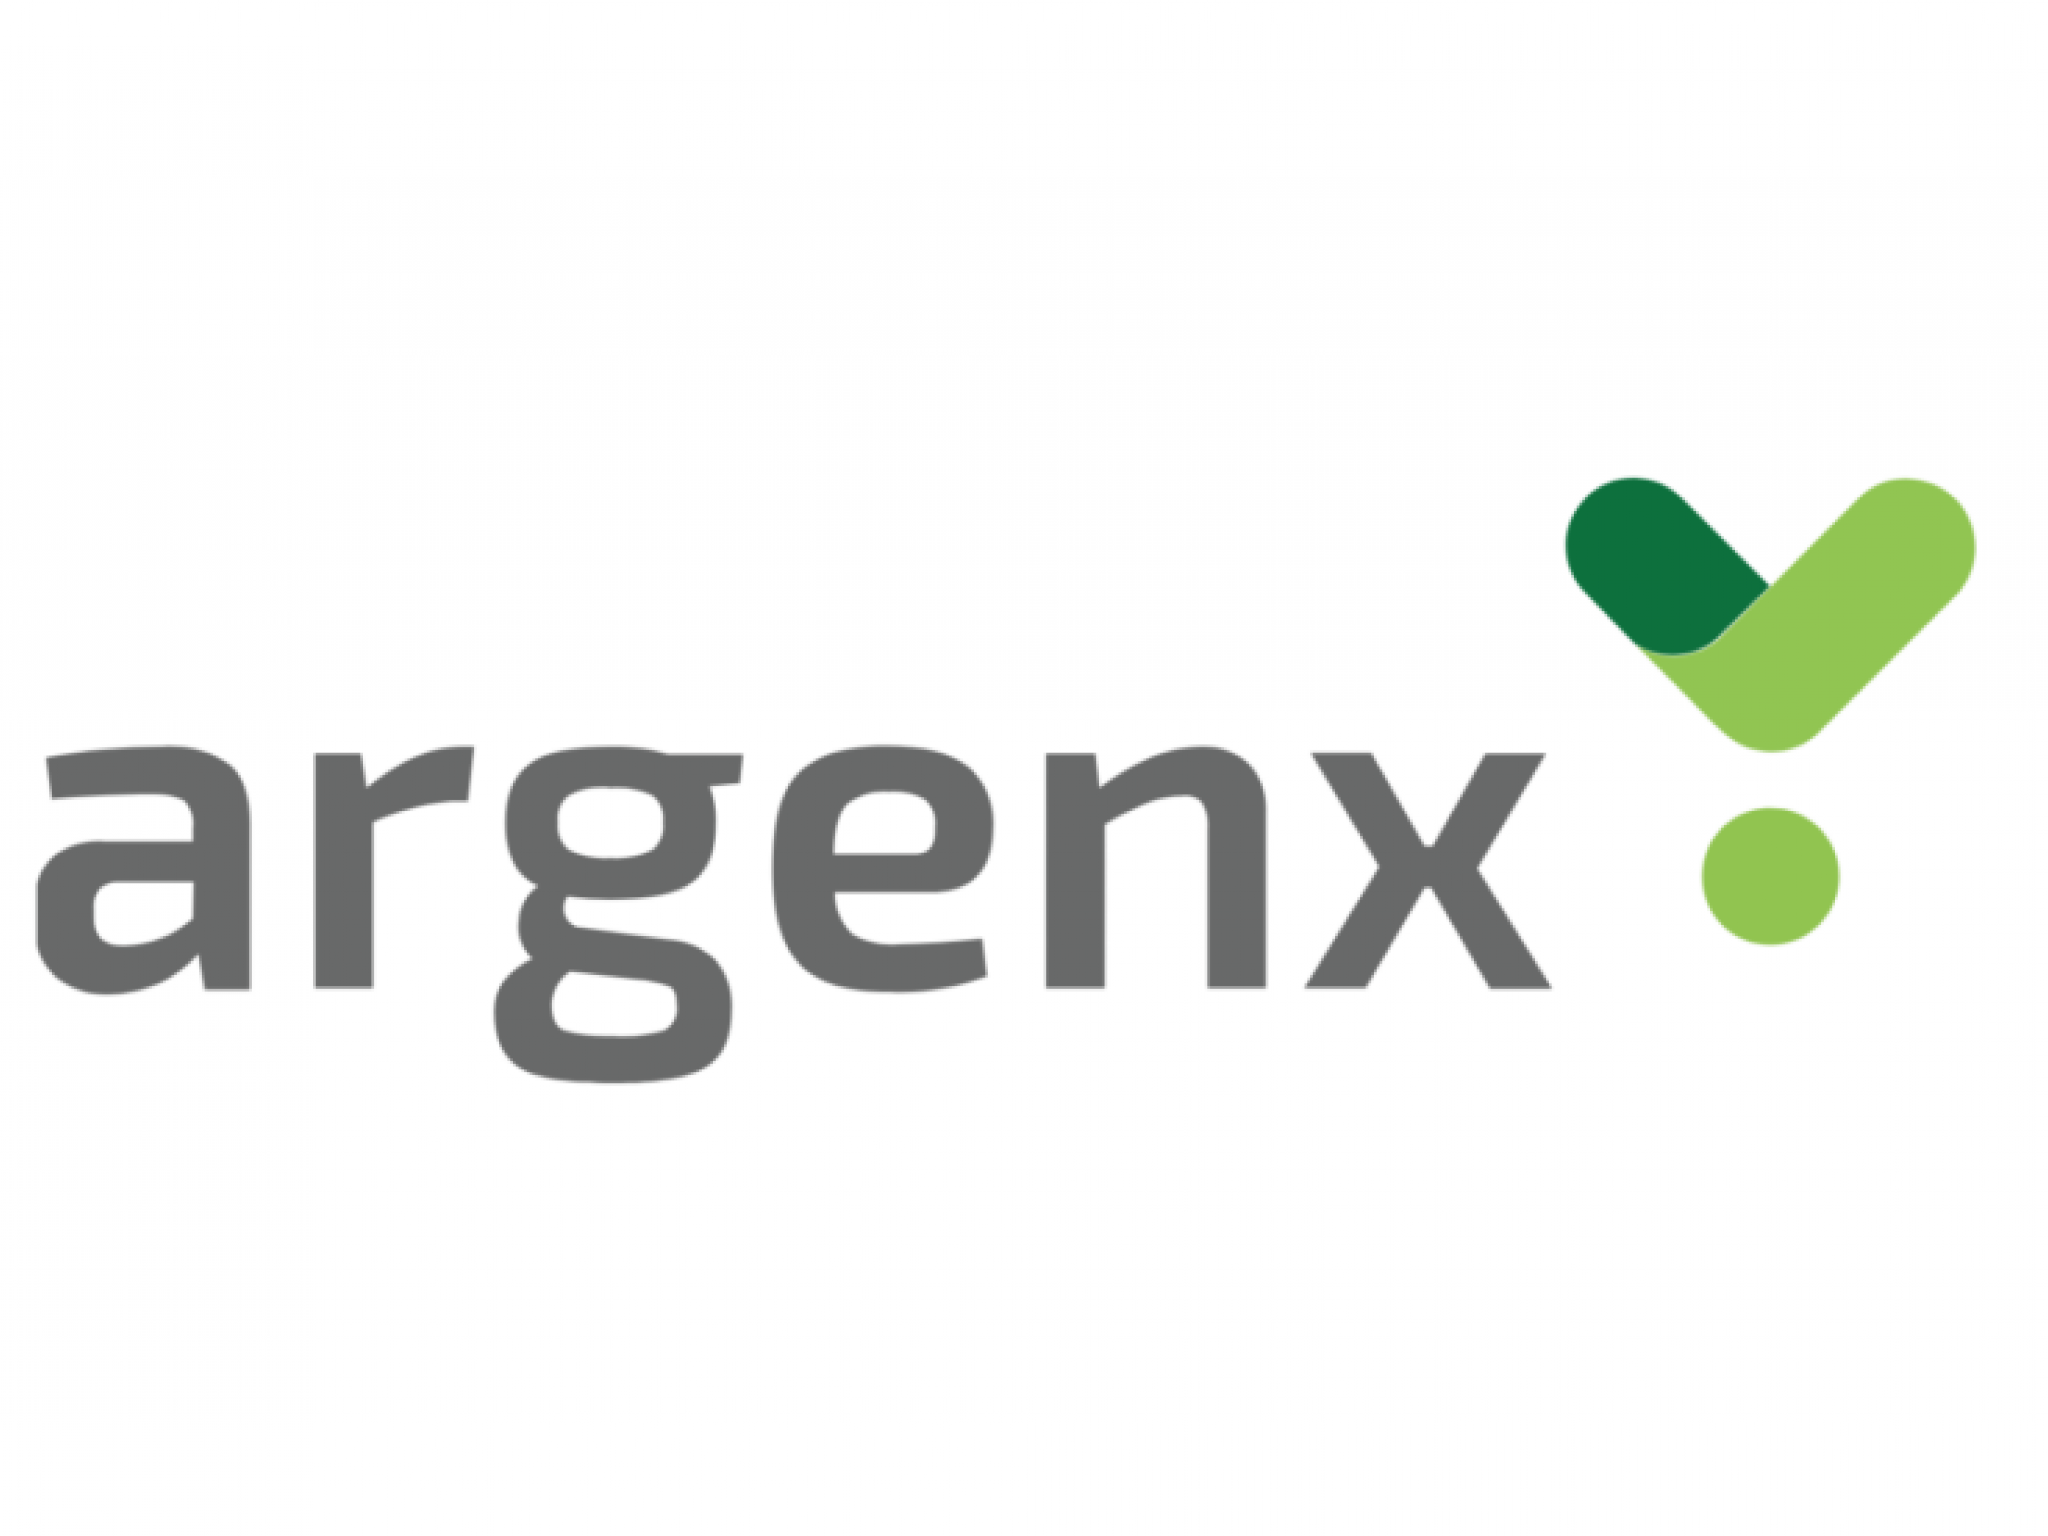  why-is-european-pharma-giant-argenx-valued-at-over-20b-trading-higher-on-thursday 